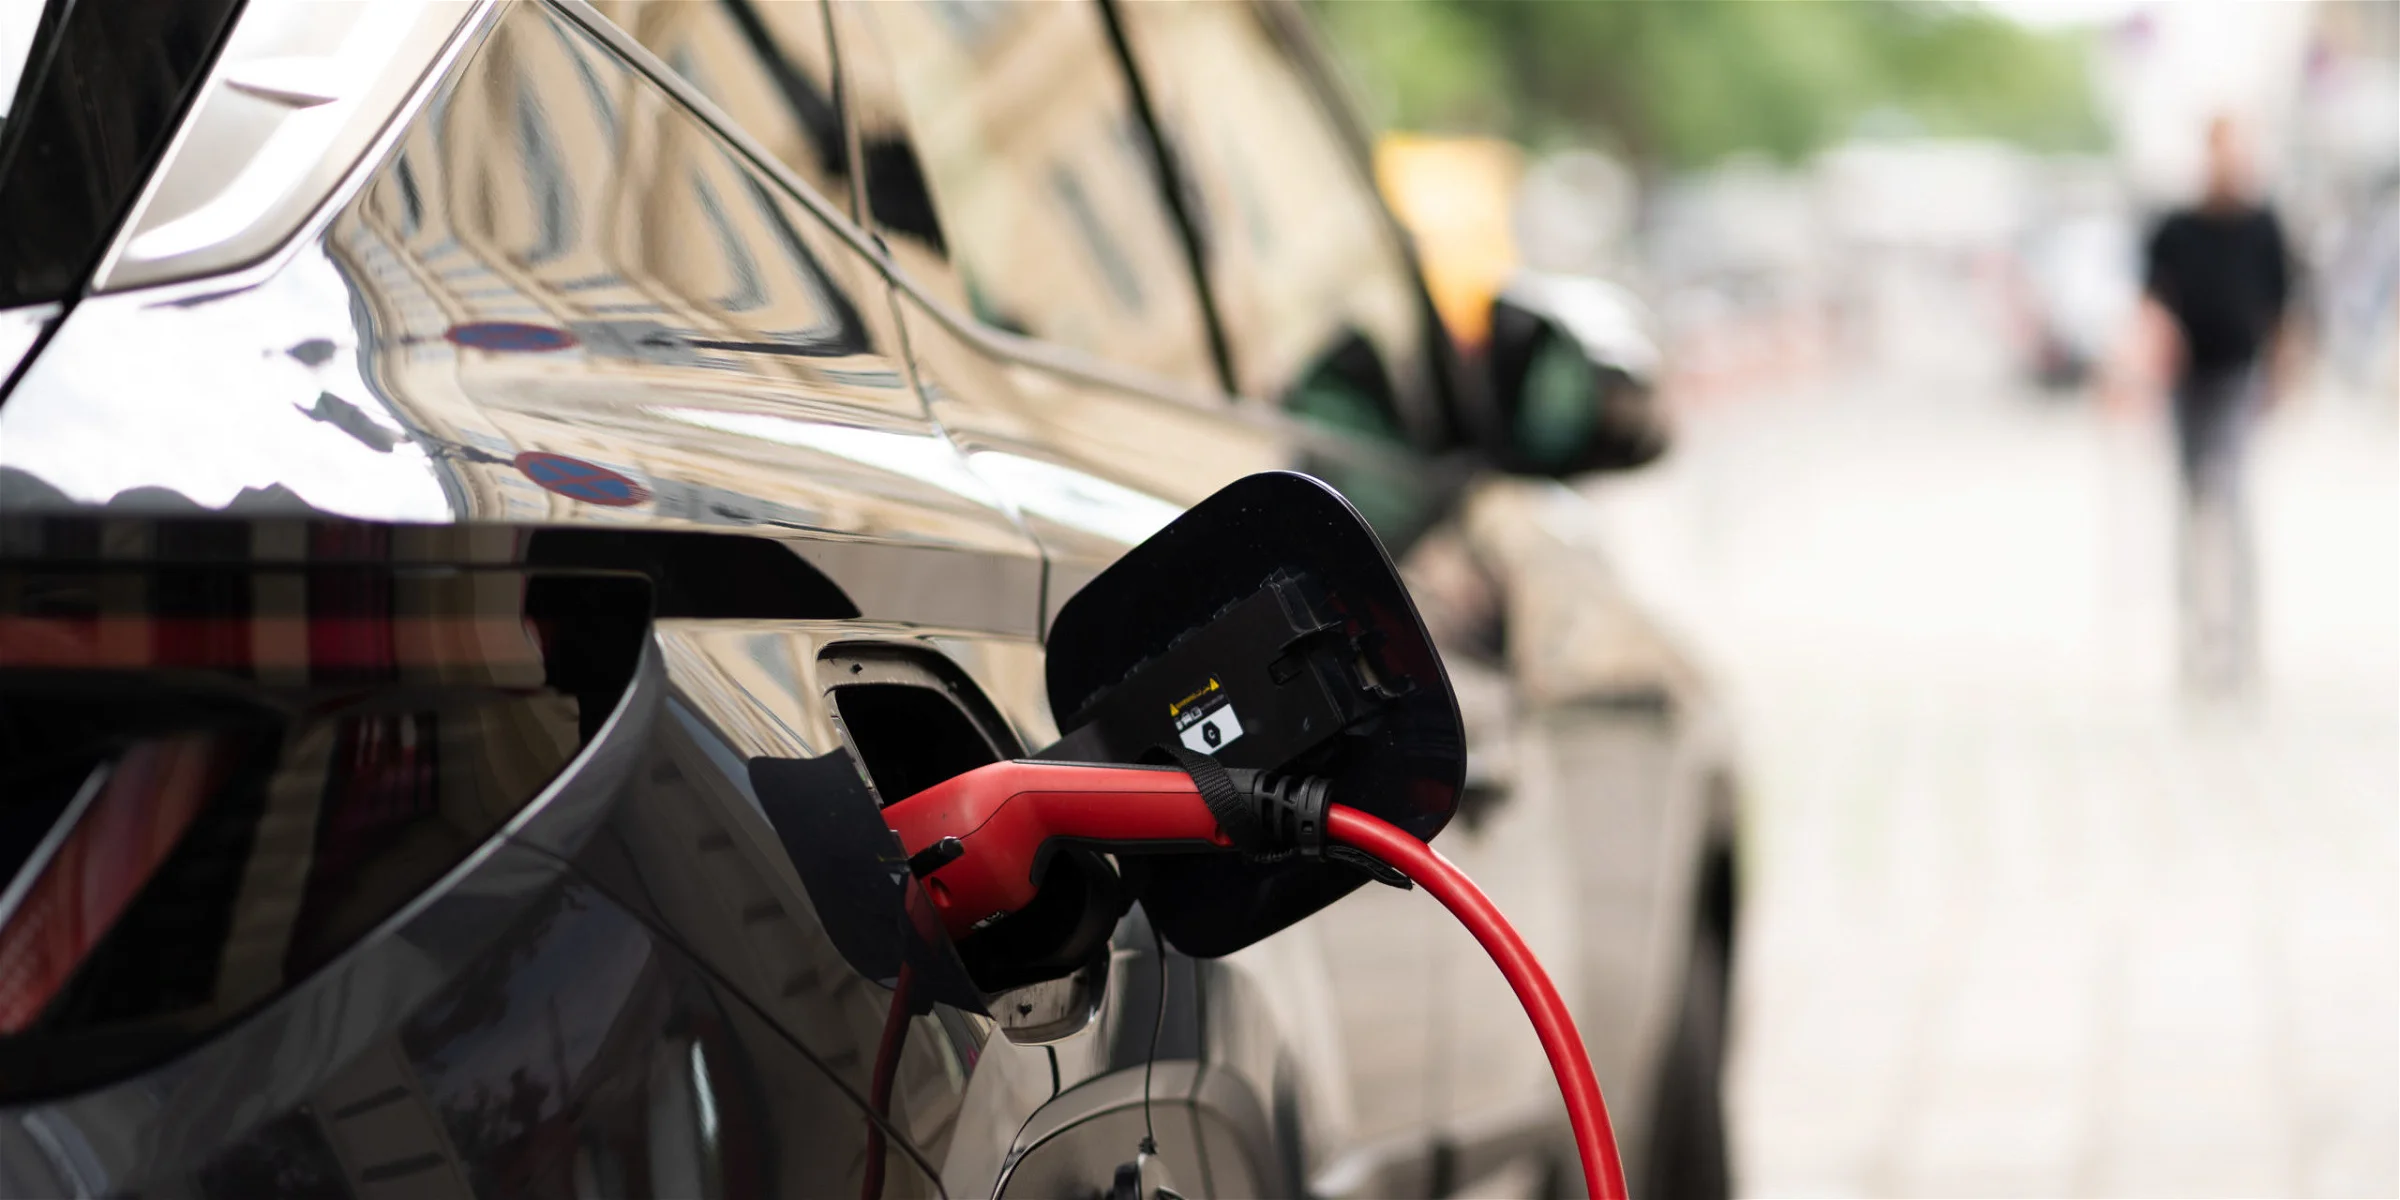 Electric vehicles (EV) have unique crash risks including how heavy they are and how faster acceleration results in accidents. If you were injured, our Charleston SC car wreck attorneys can help.